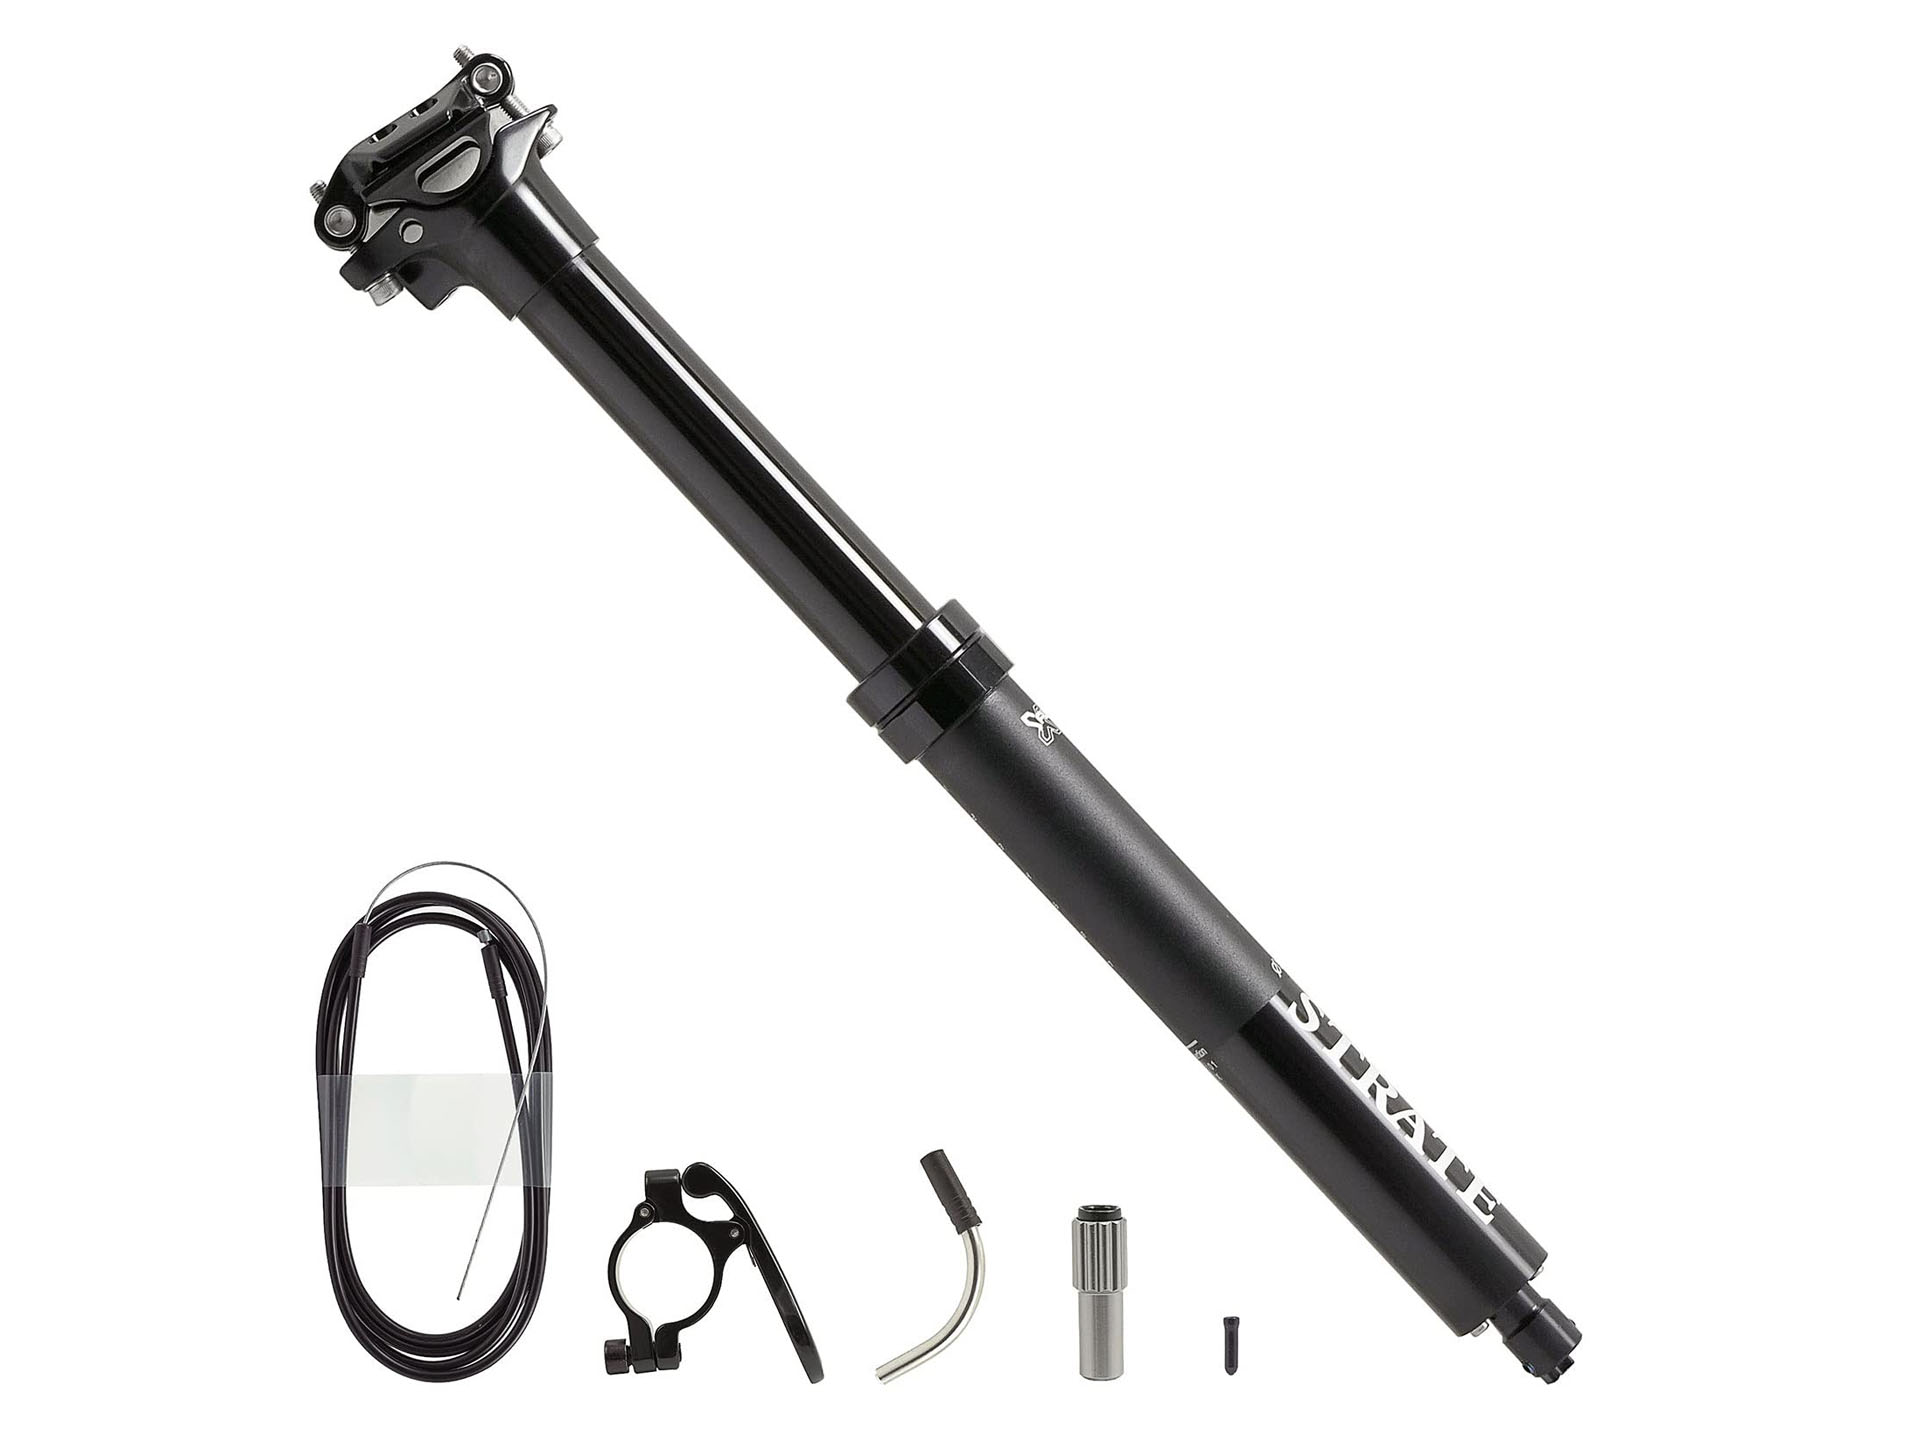 X-Fusion HILO Strate Dropper Seat Post - 31.6X400mm 125mm Travel